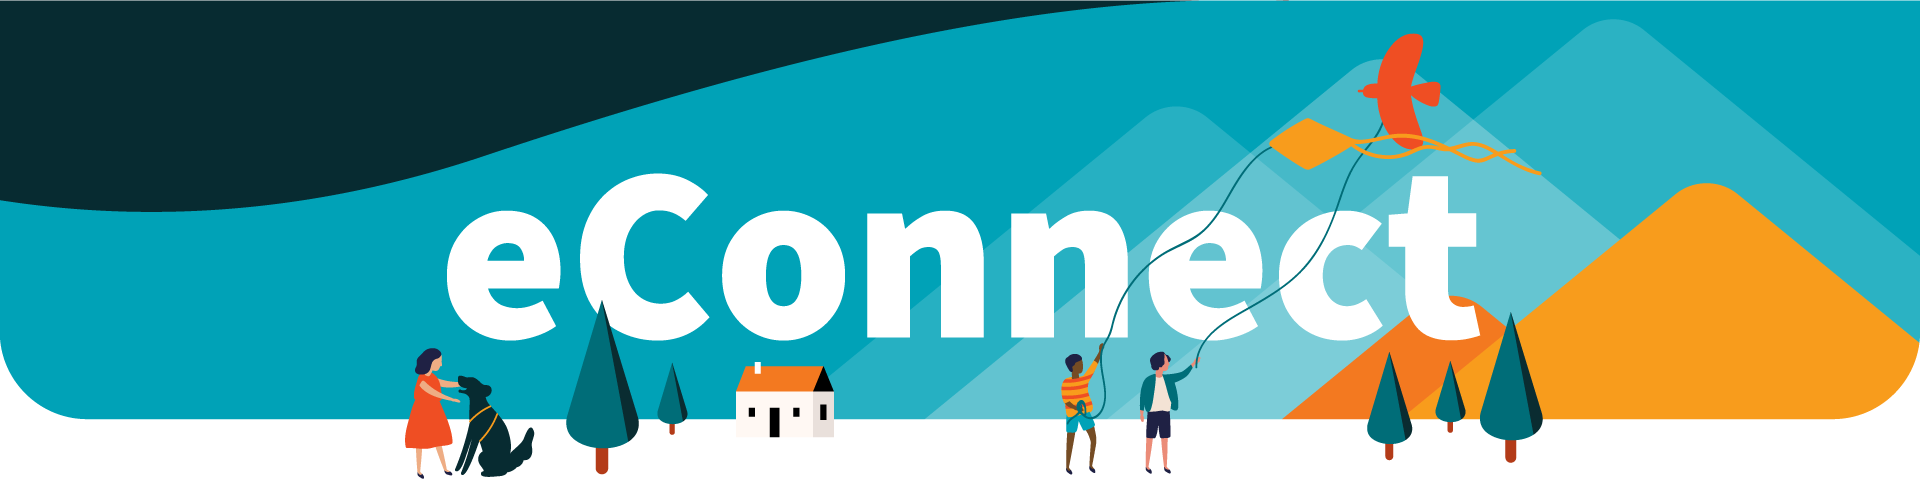 econnect newsletter